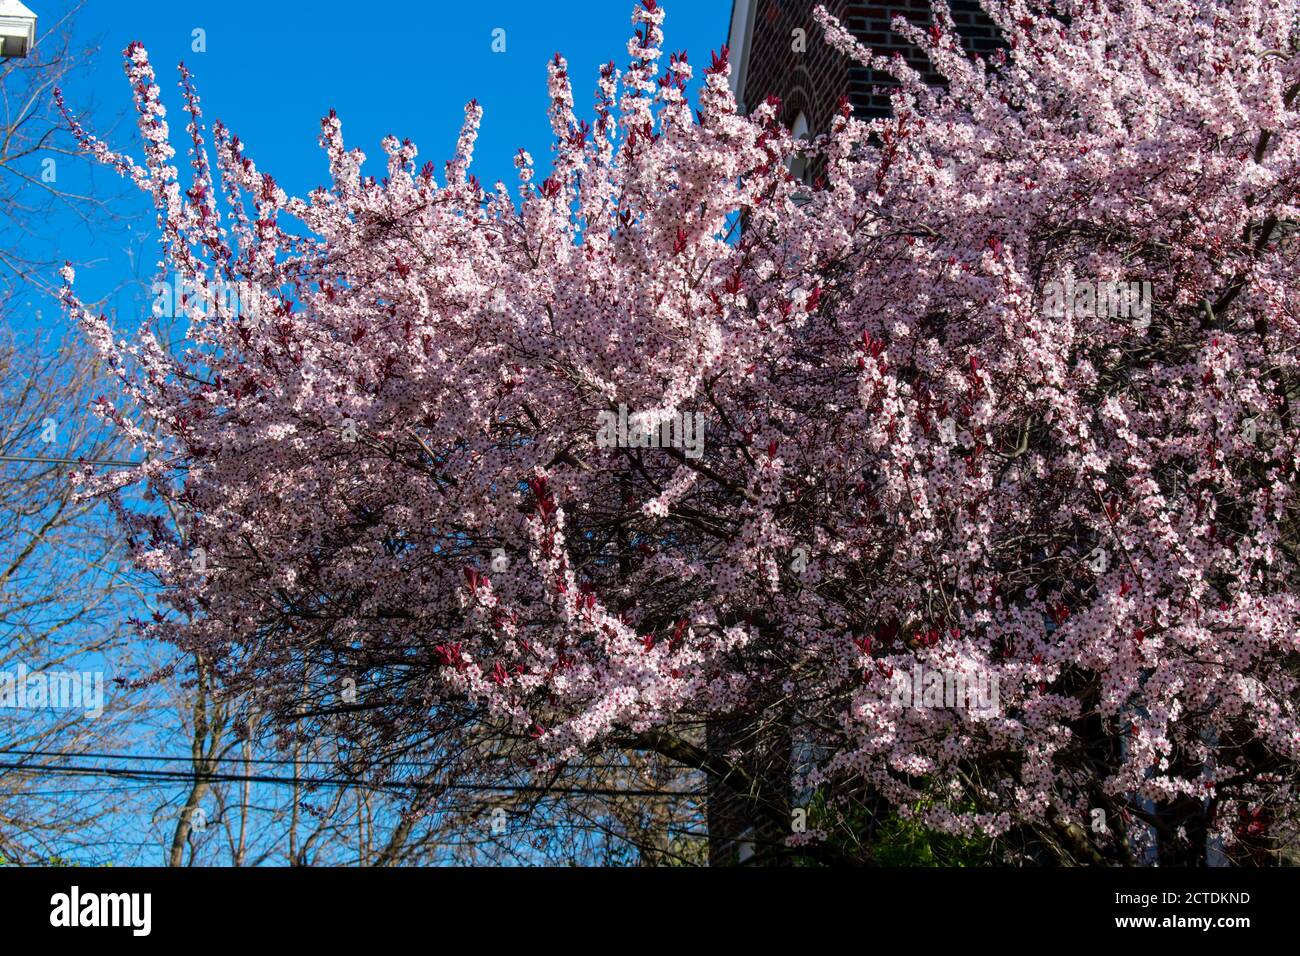 A Pink and White Cherry Blossom Tree on a Clear Blue Sky Stock Photo